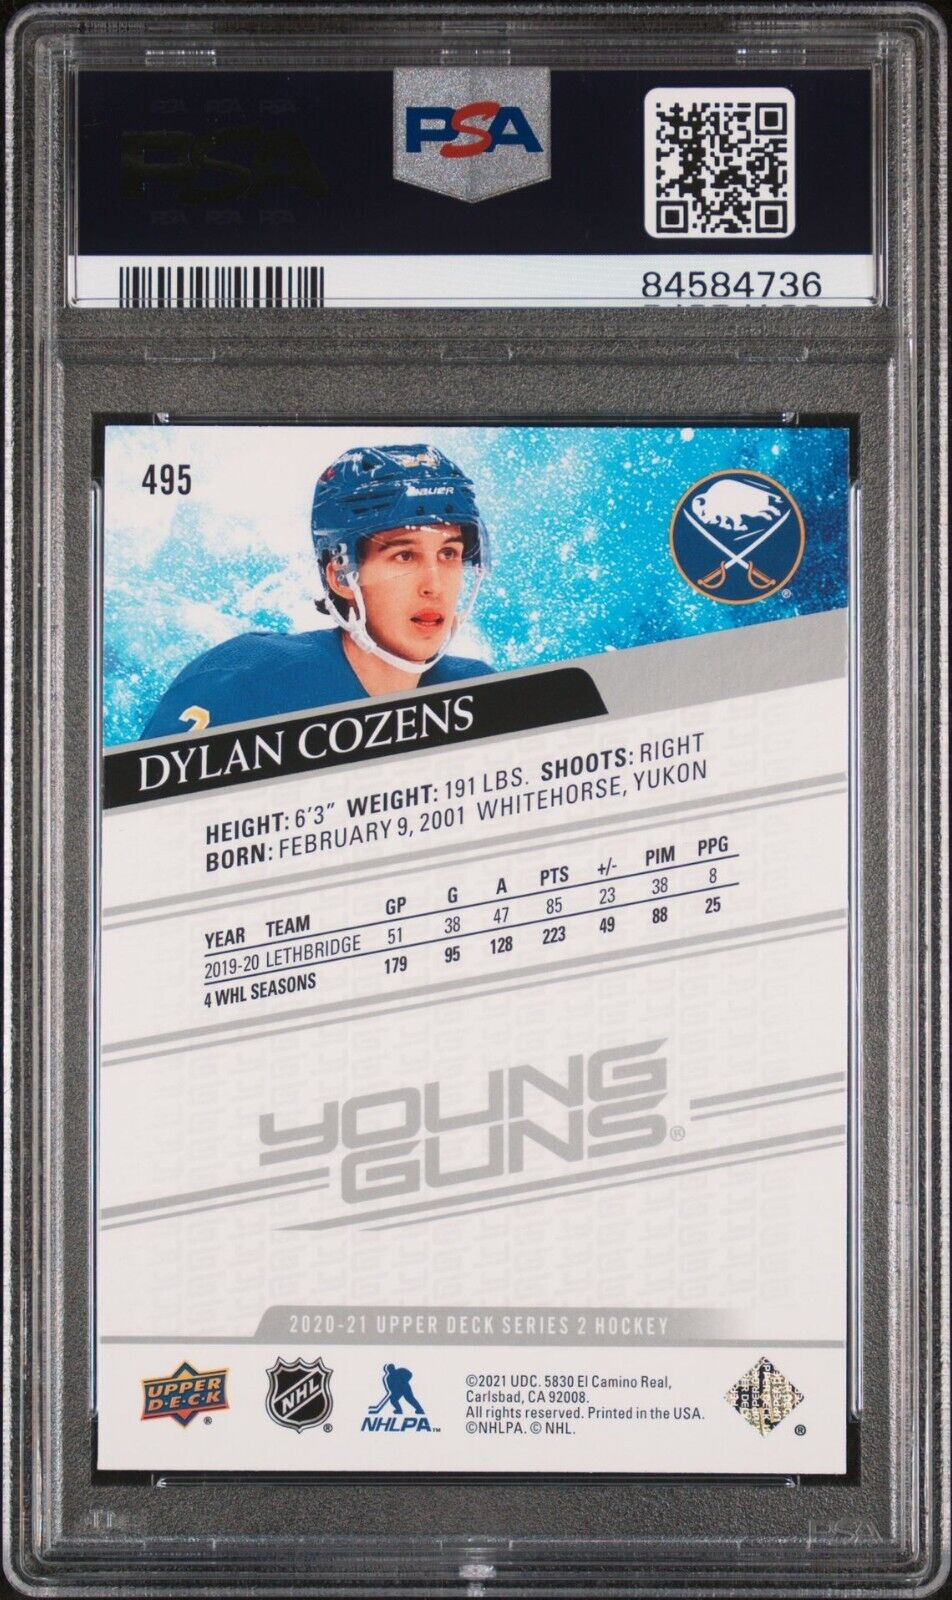 2020 Upper Deck Hockey Young Guns #495 Dylan Cozens PSA 10 Rookie Card RC - 643-collectibles